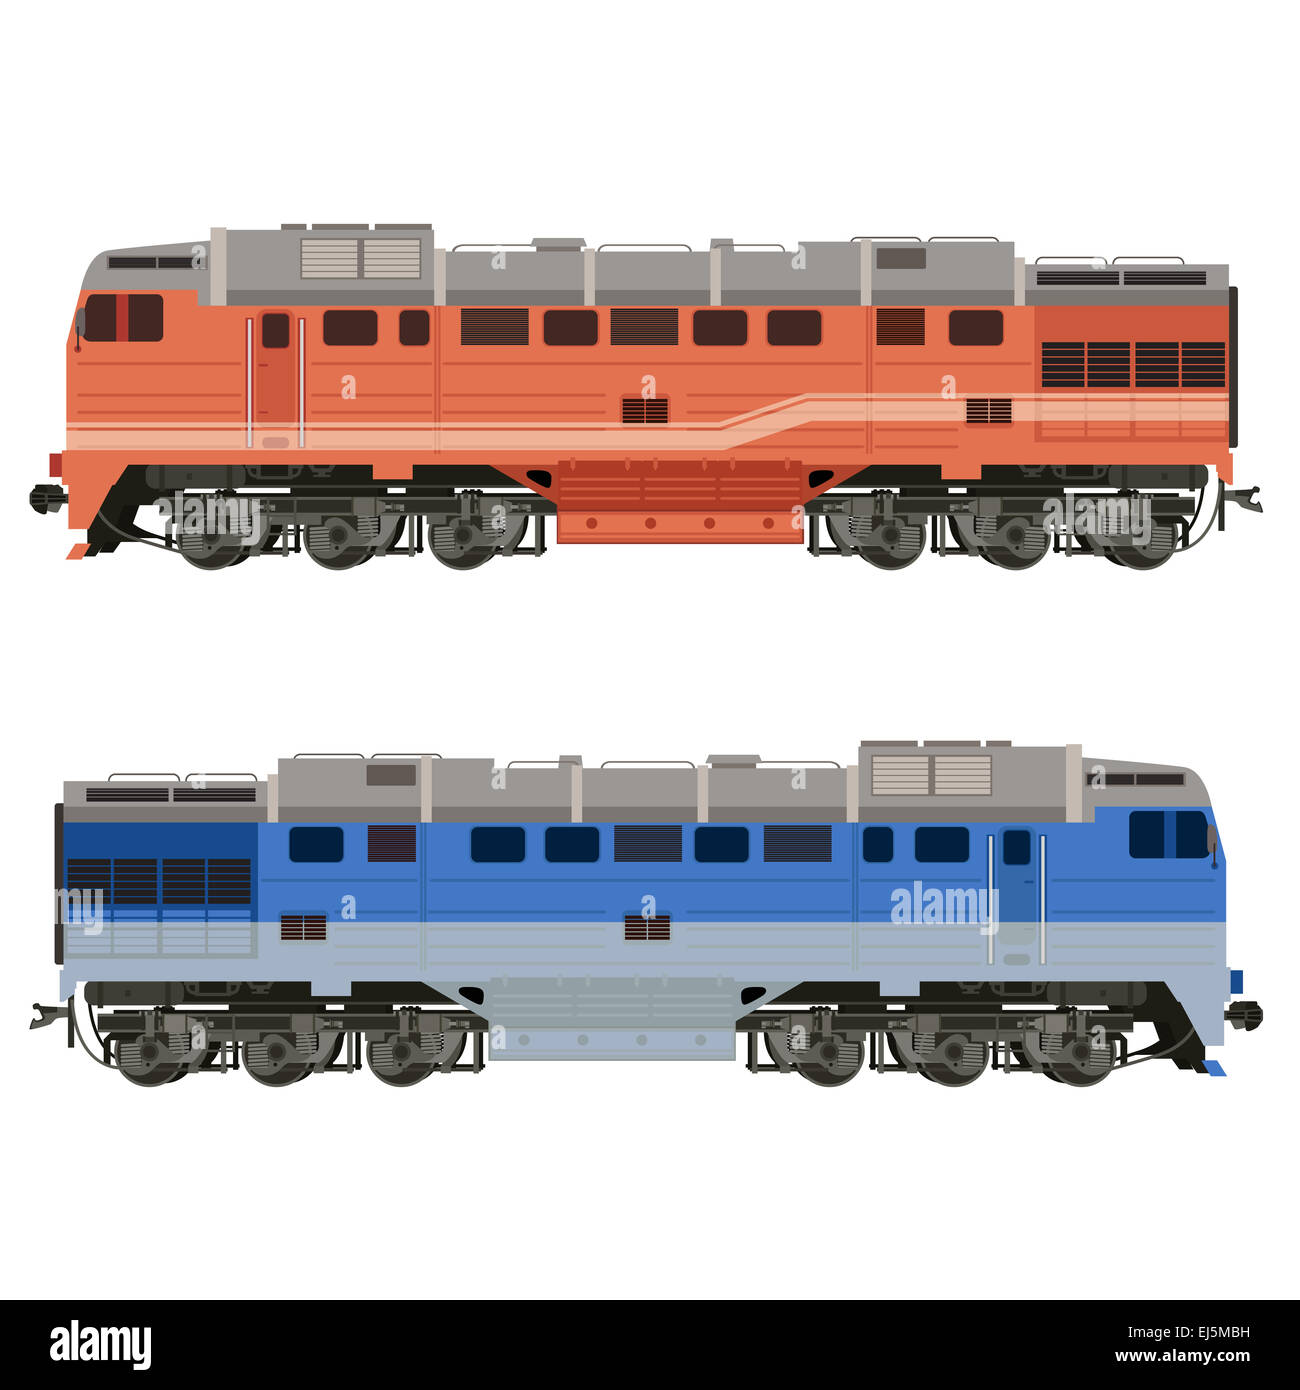 Vector image of an real-looking shiny Locomotive Stock Photo